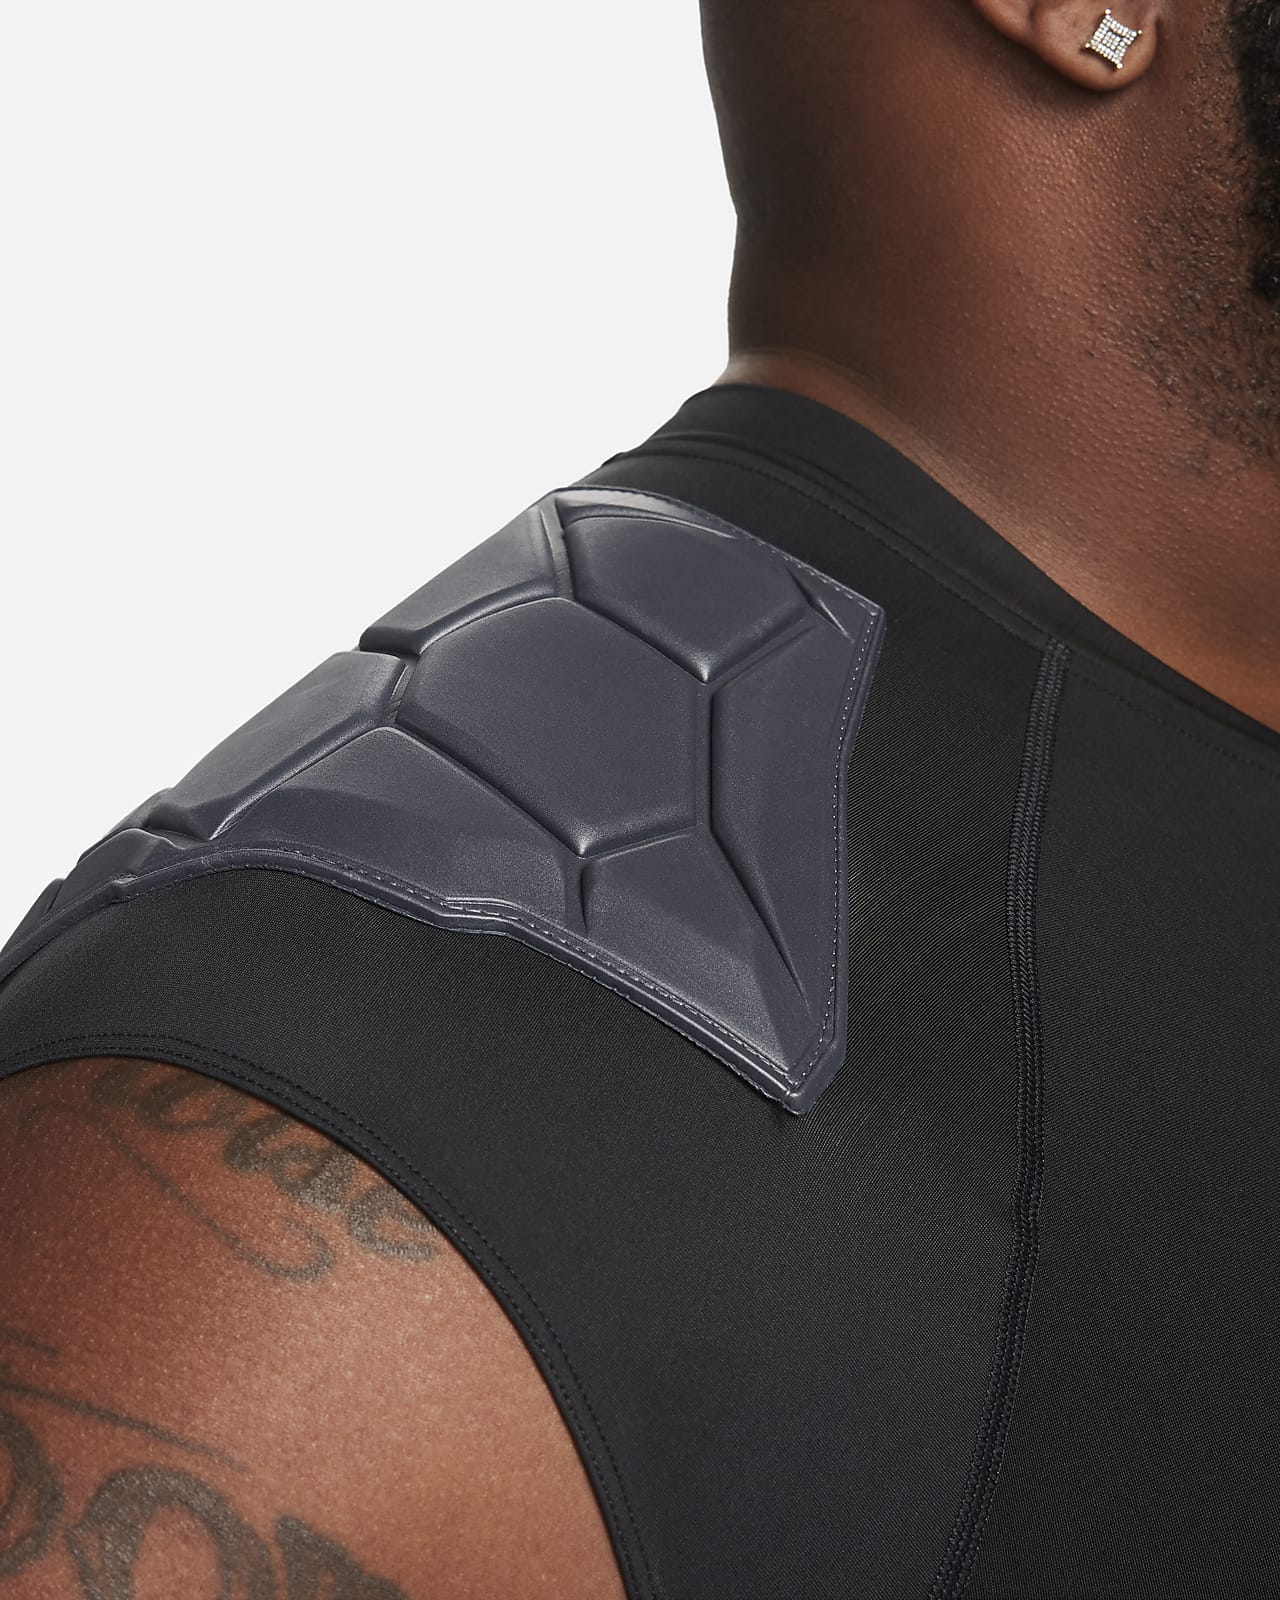 Stay Protected on the Field with Nike Pro Combat Hyperstrong